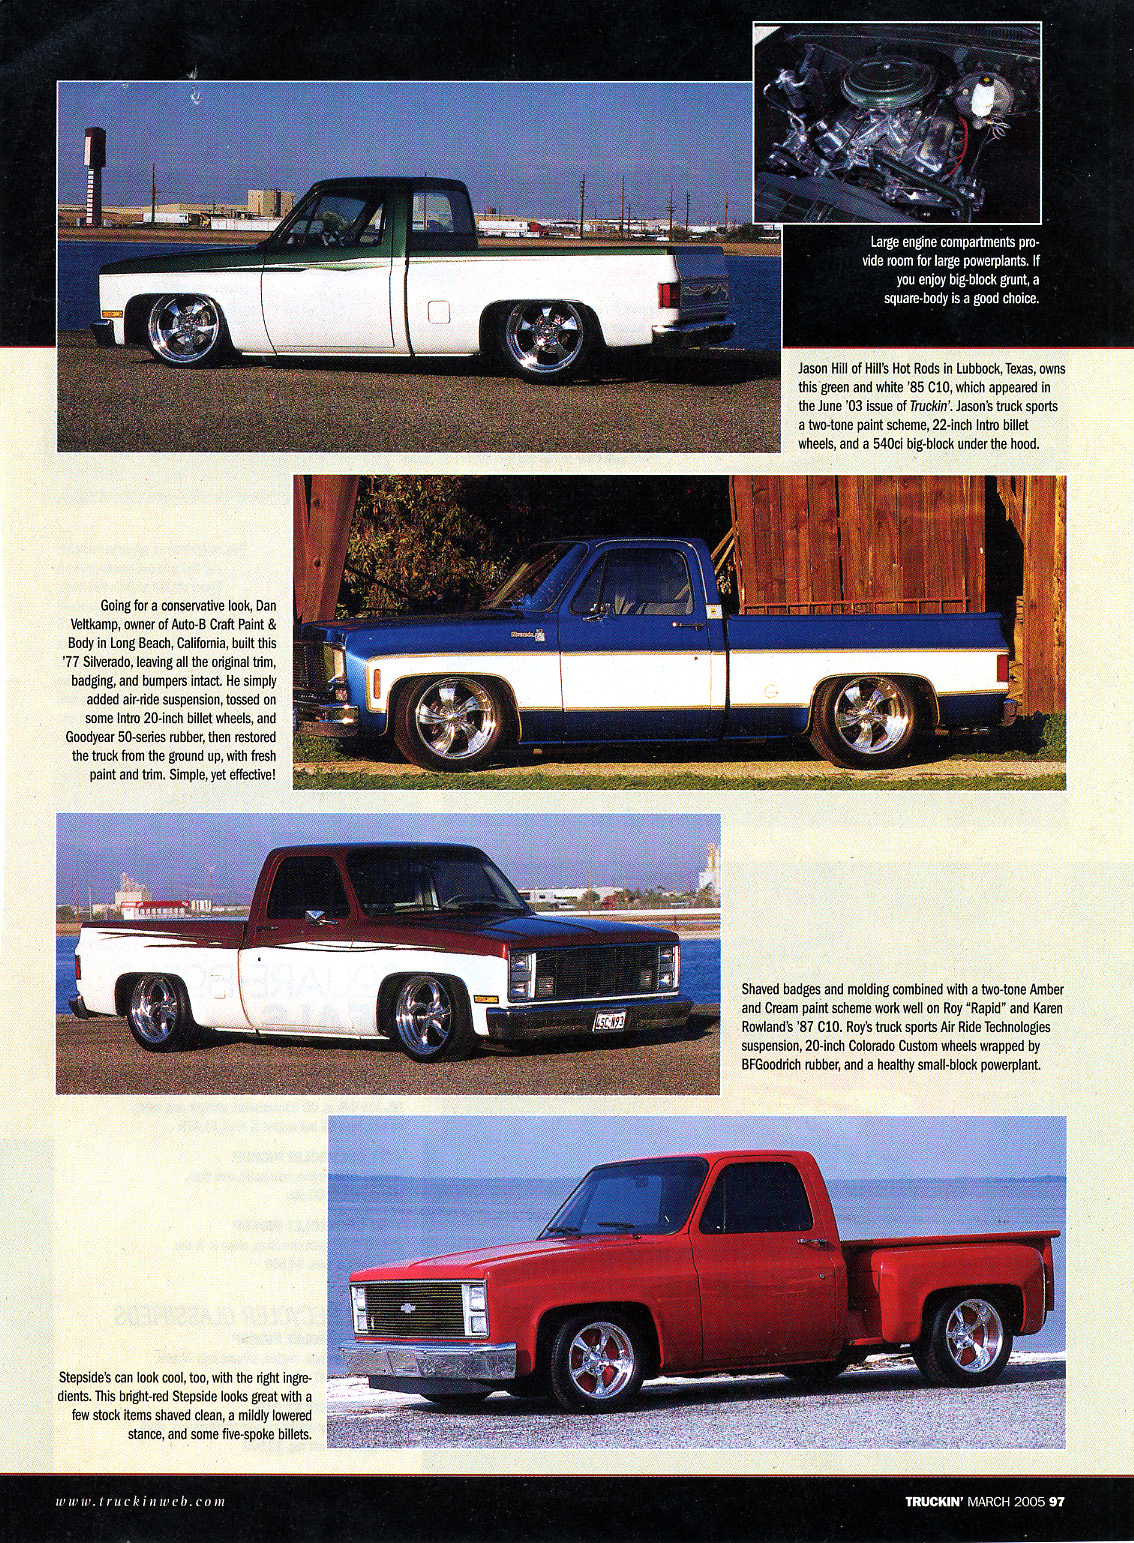 Square Body Revival: The Reemergence of the 73-87 Chevy, written by Travis ...